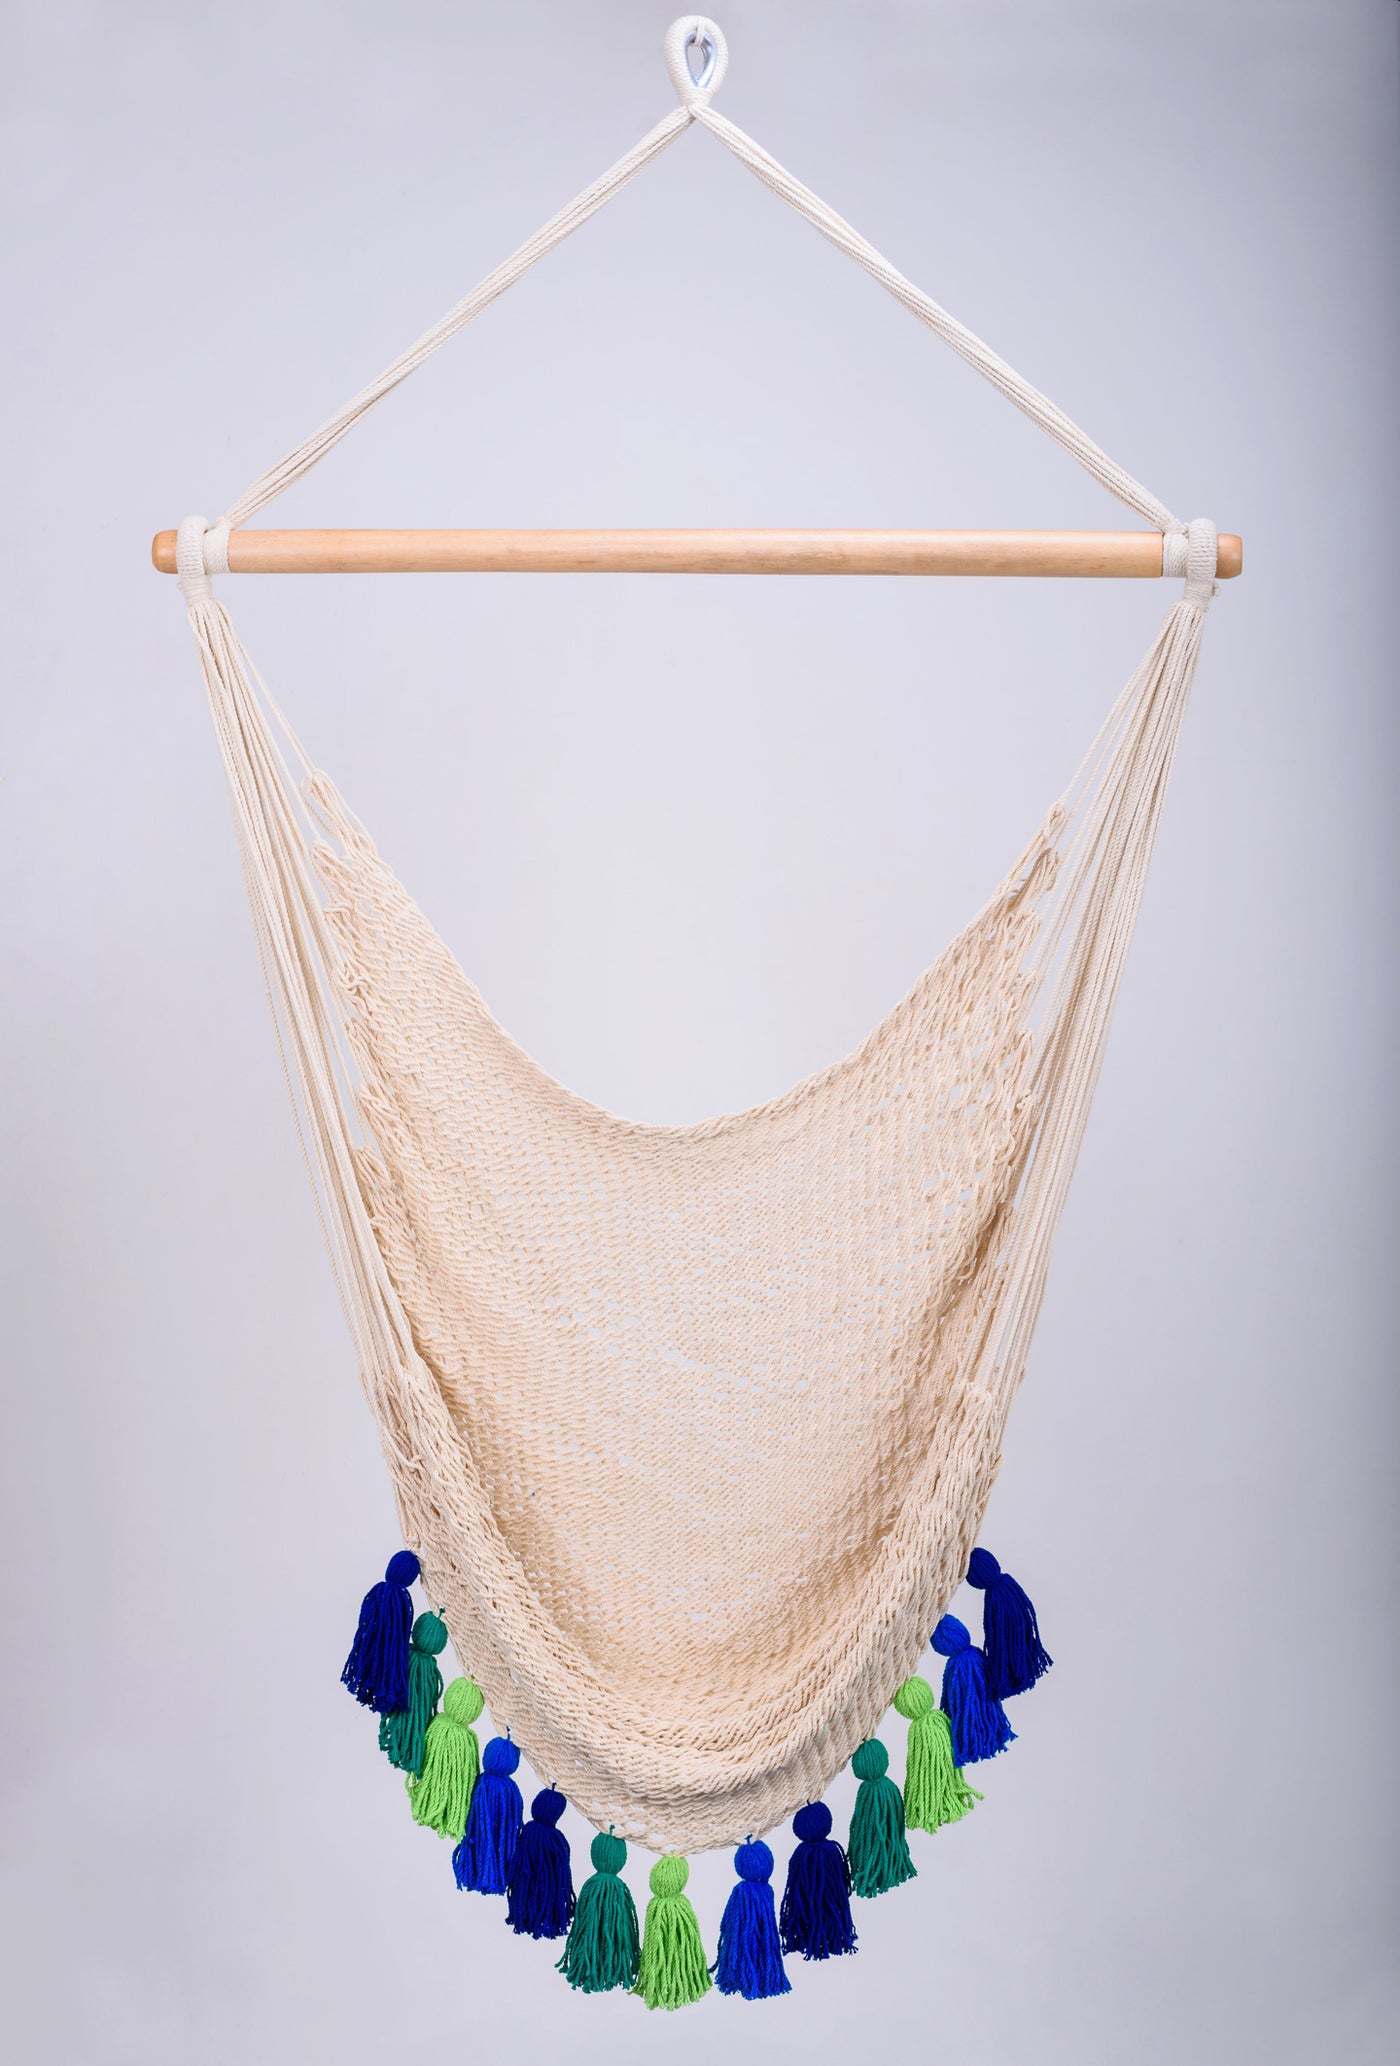 Deluxe Natural Cotton Hammock Swing with Rainforest Inspired Tassels